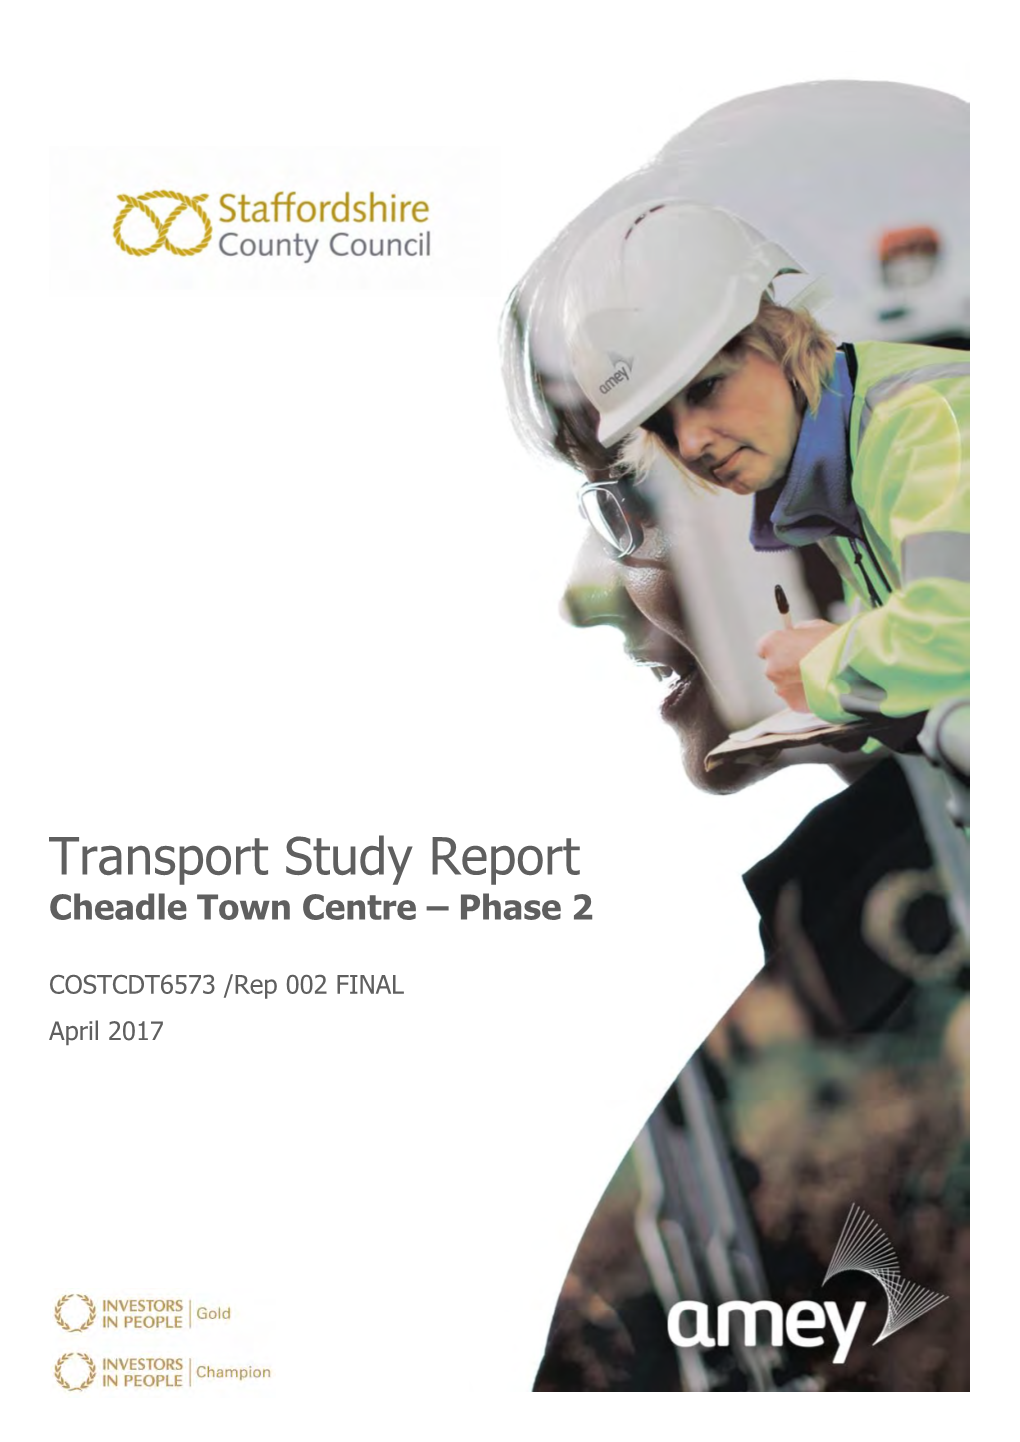 Transport Study Report Cheadle Town Centre Phase 2